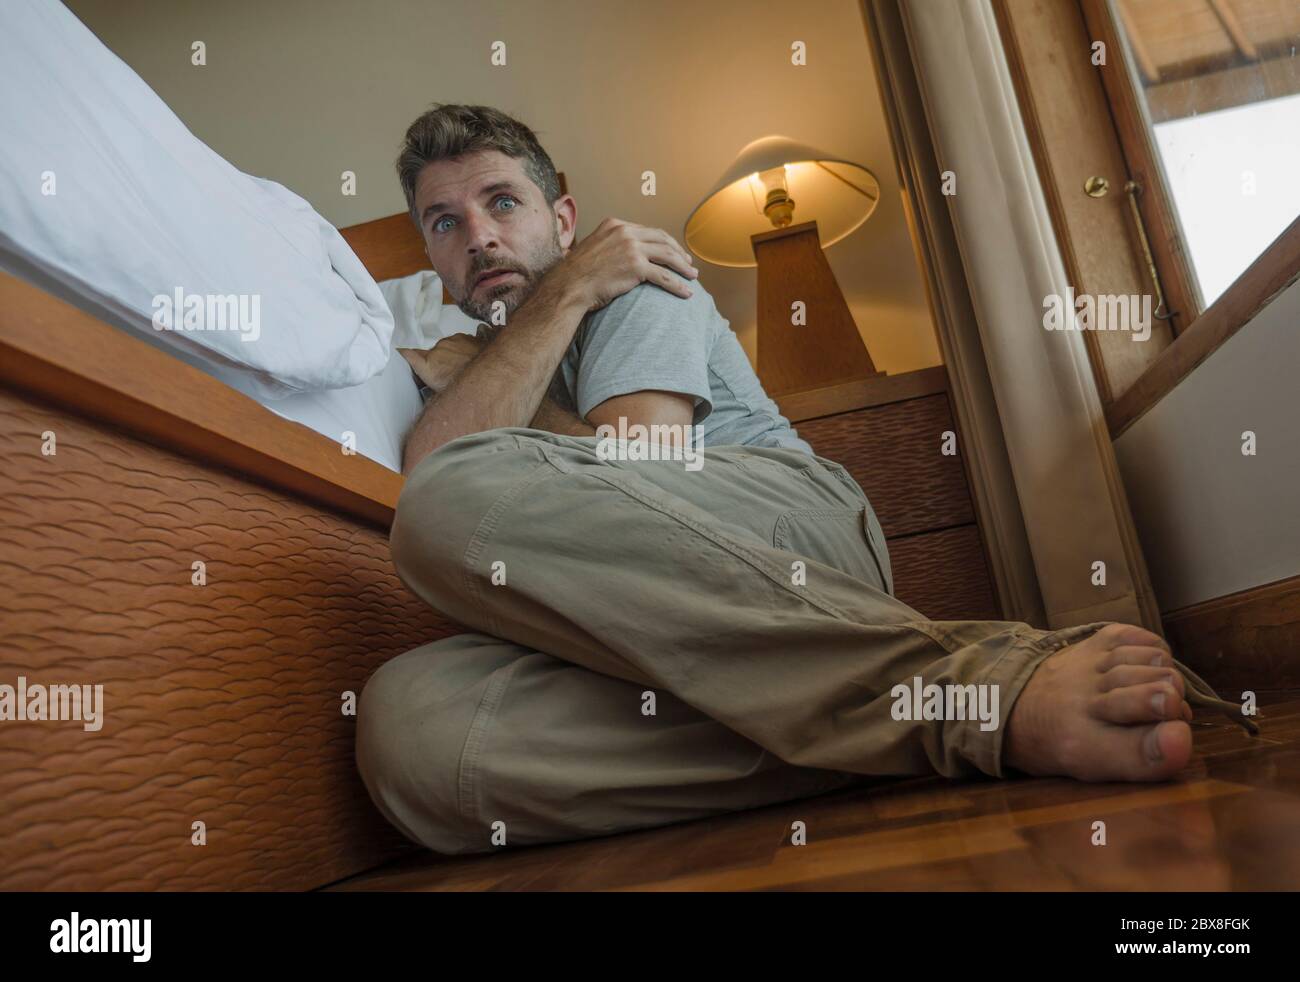 dramatic home portrait of young depressed and desperate man sitting on bedroom floor next to bed suffering depression and anxiety feeling overwhelmed Stock Photo